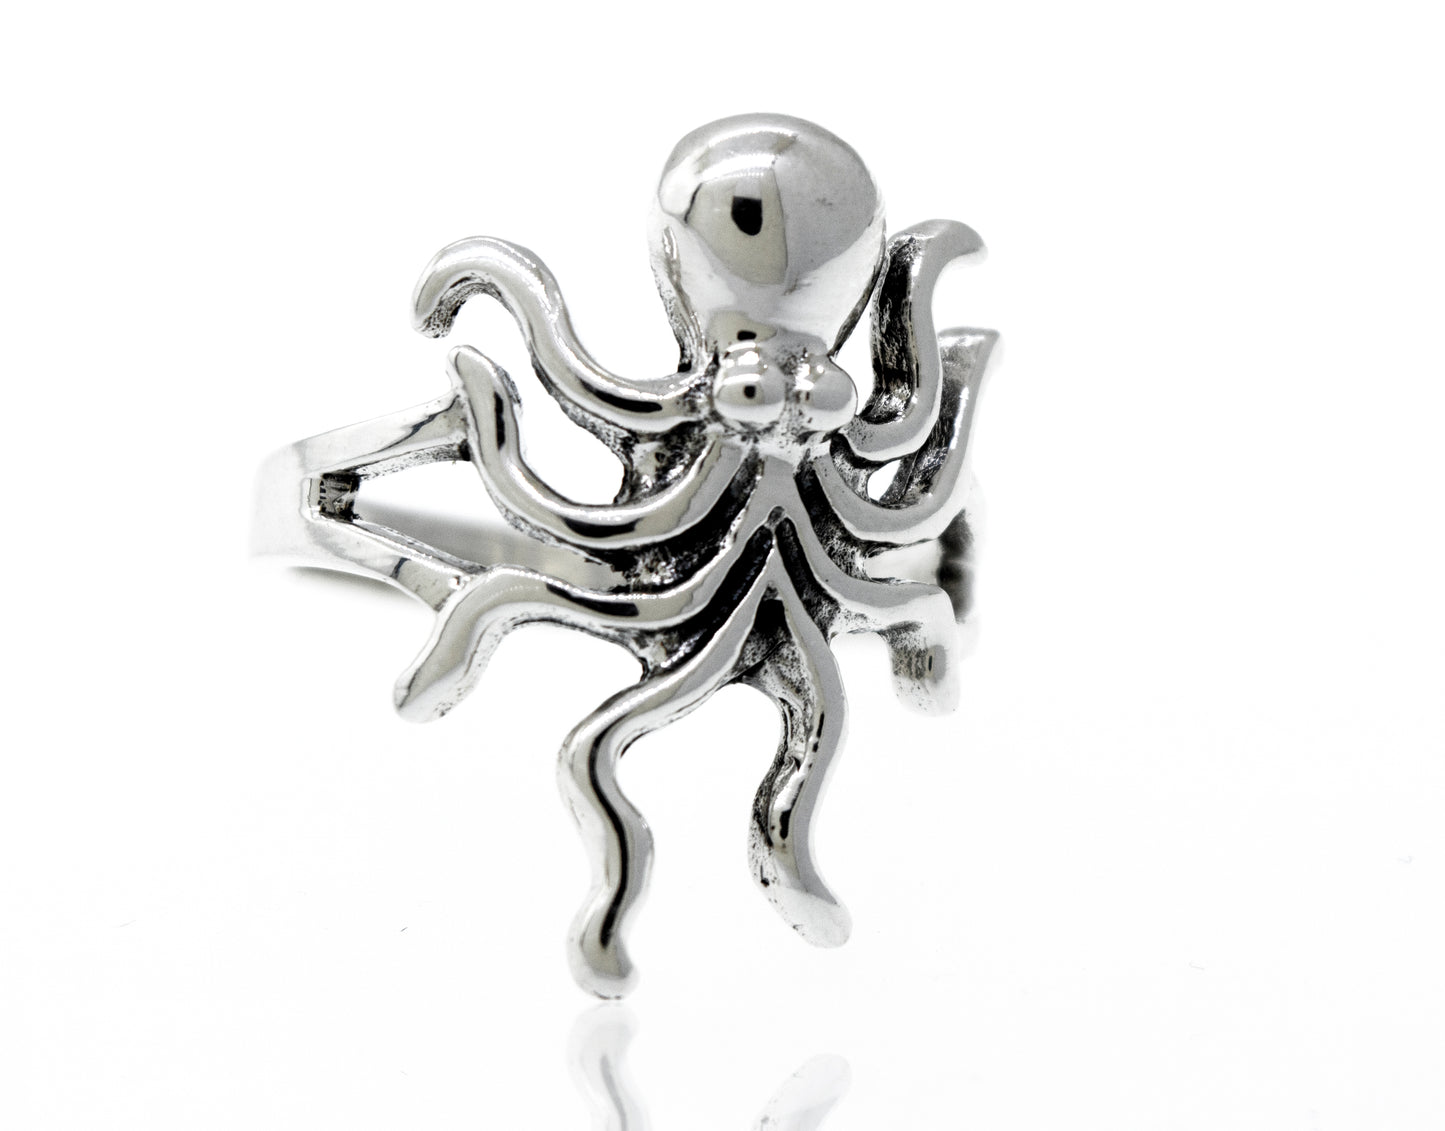 A high polish Super Silver sterling silver octopus ring on a white background.